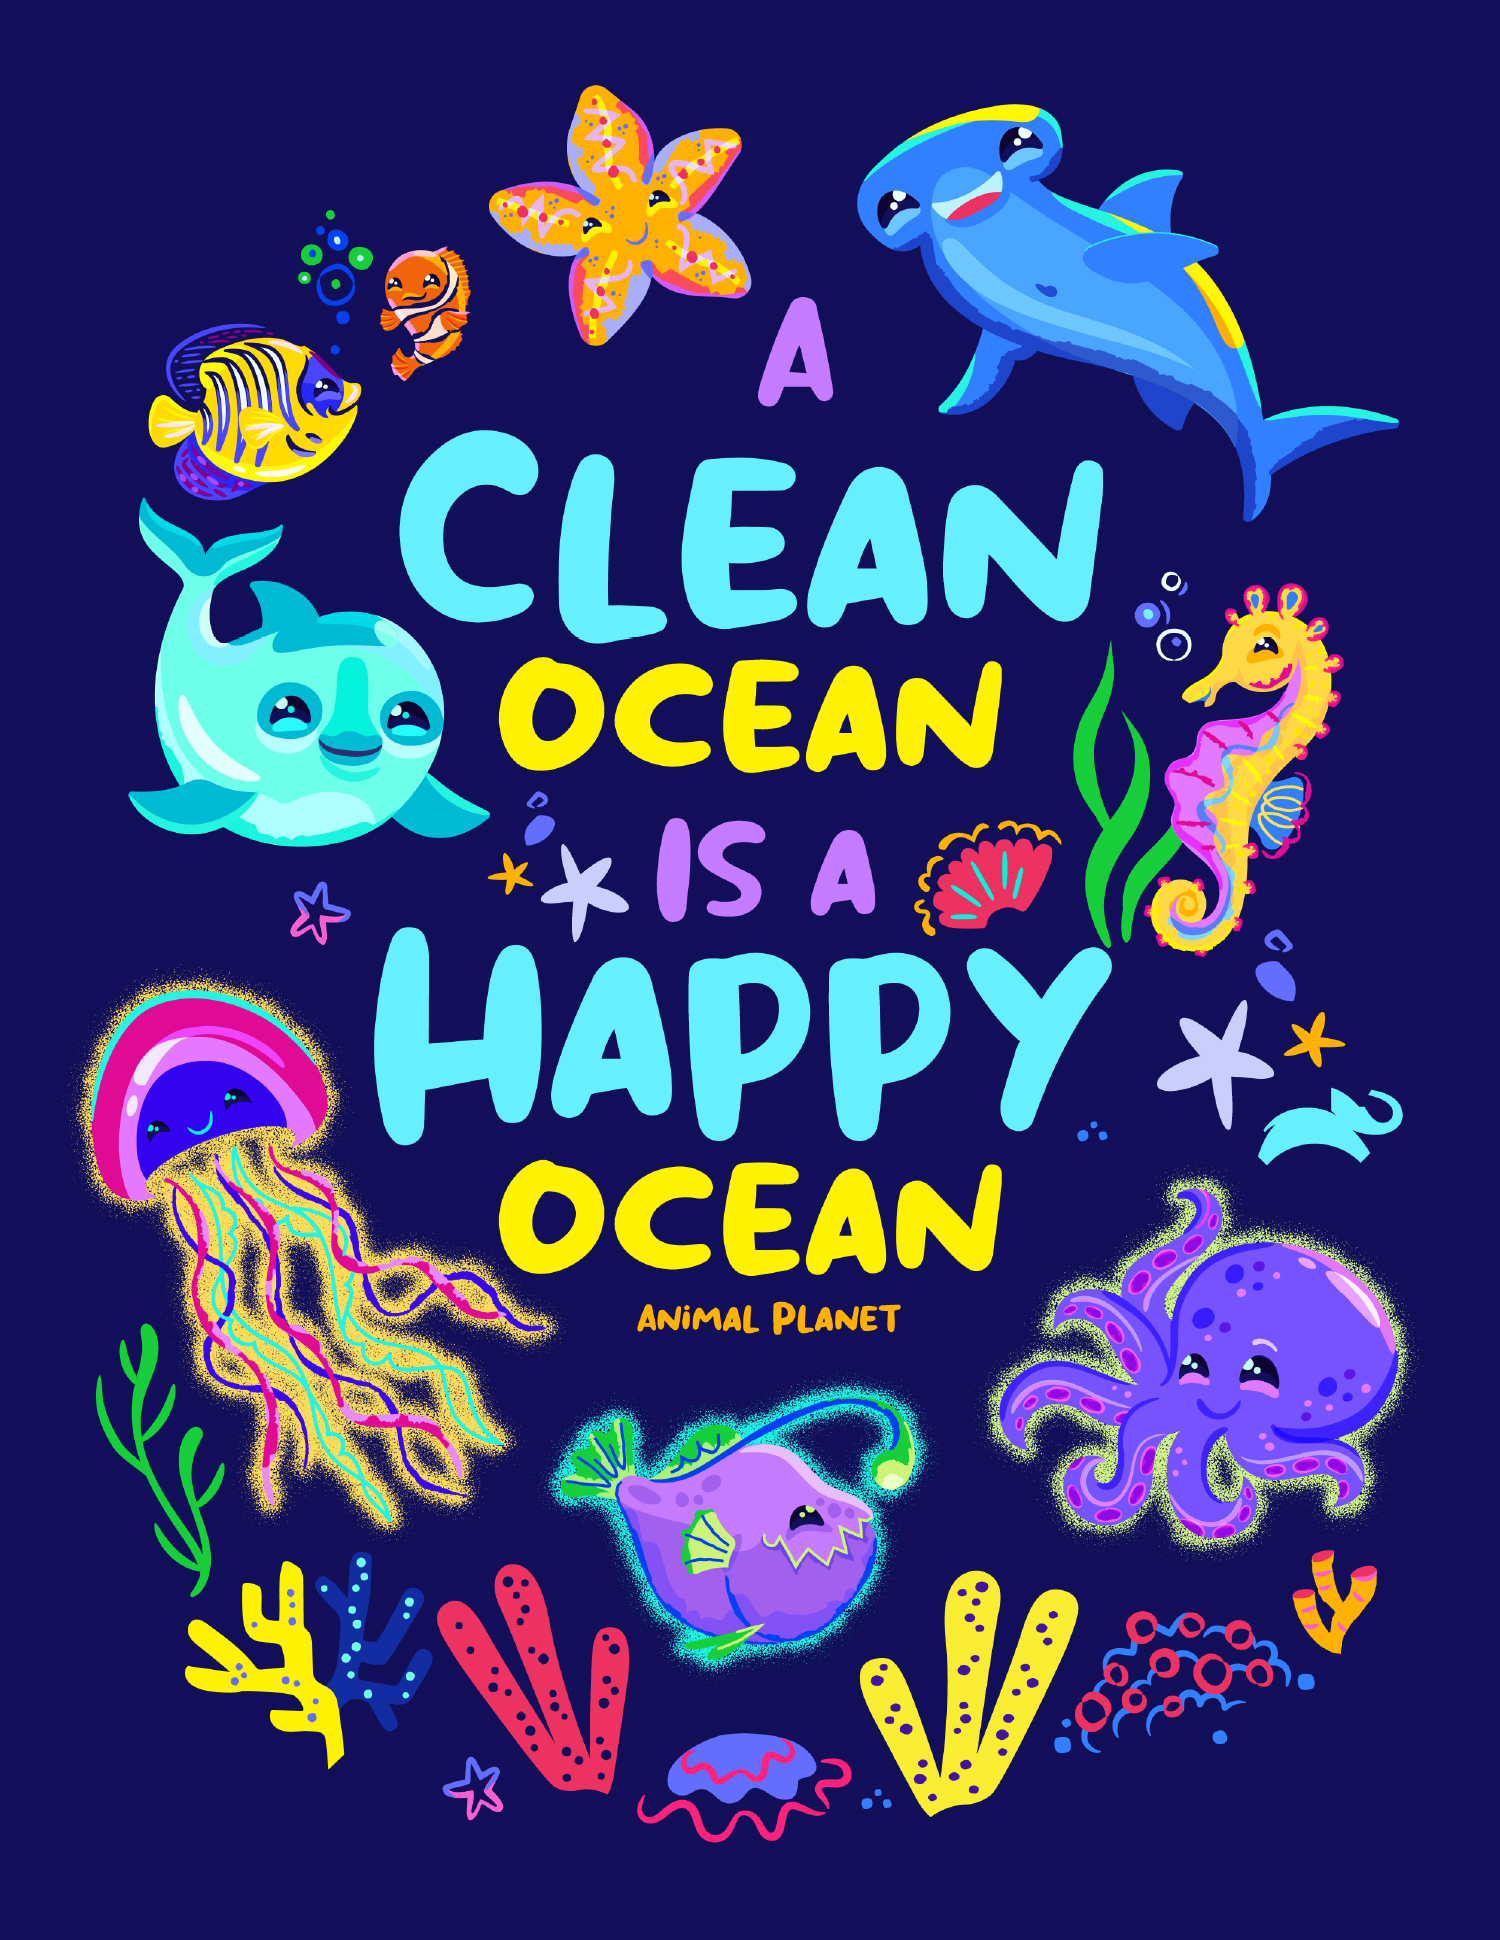 Composed design with character art of sea animals surrounding the words, "A Clean Ocean Is a Happy Ocean."